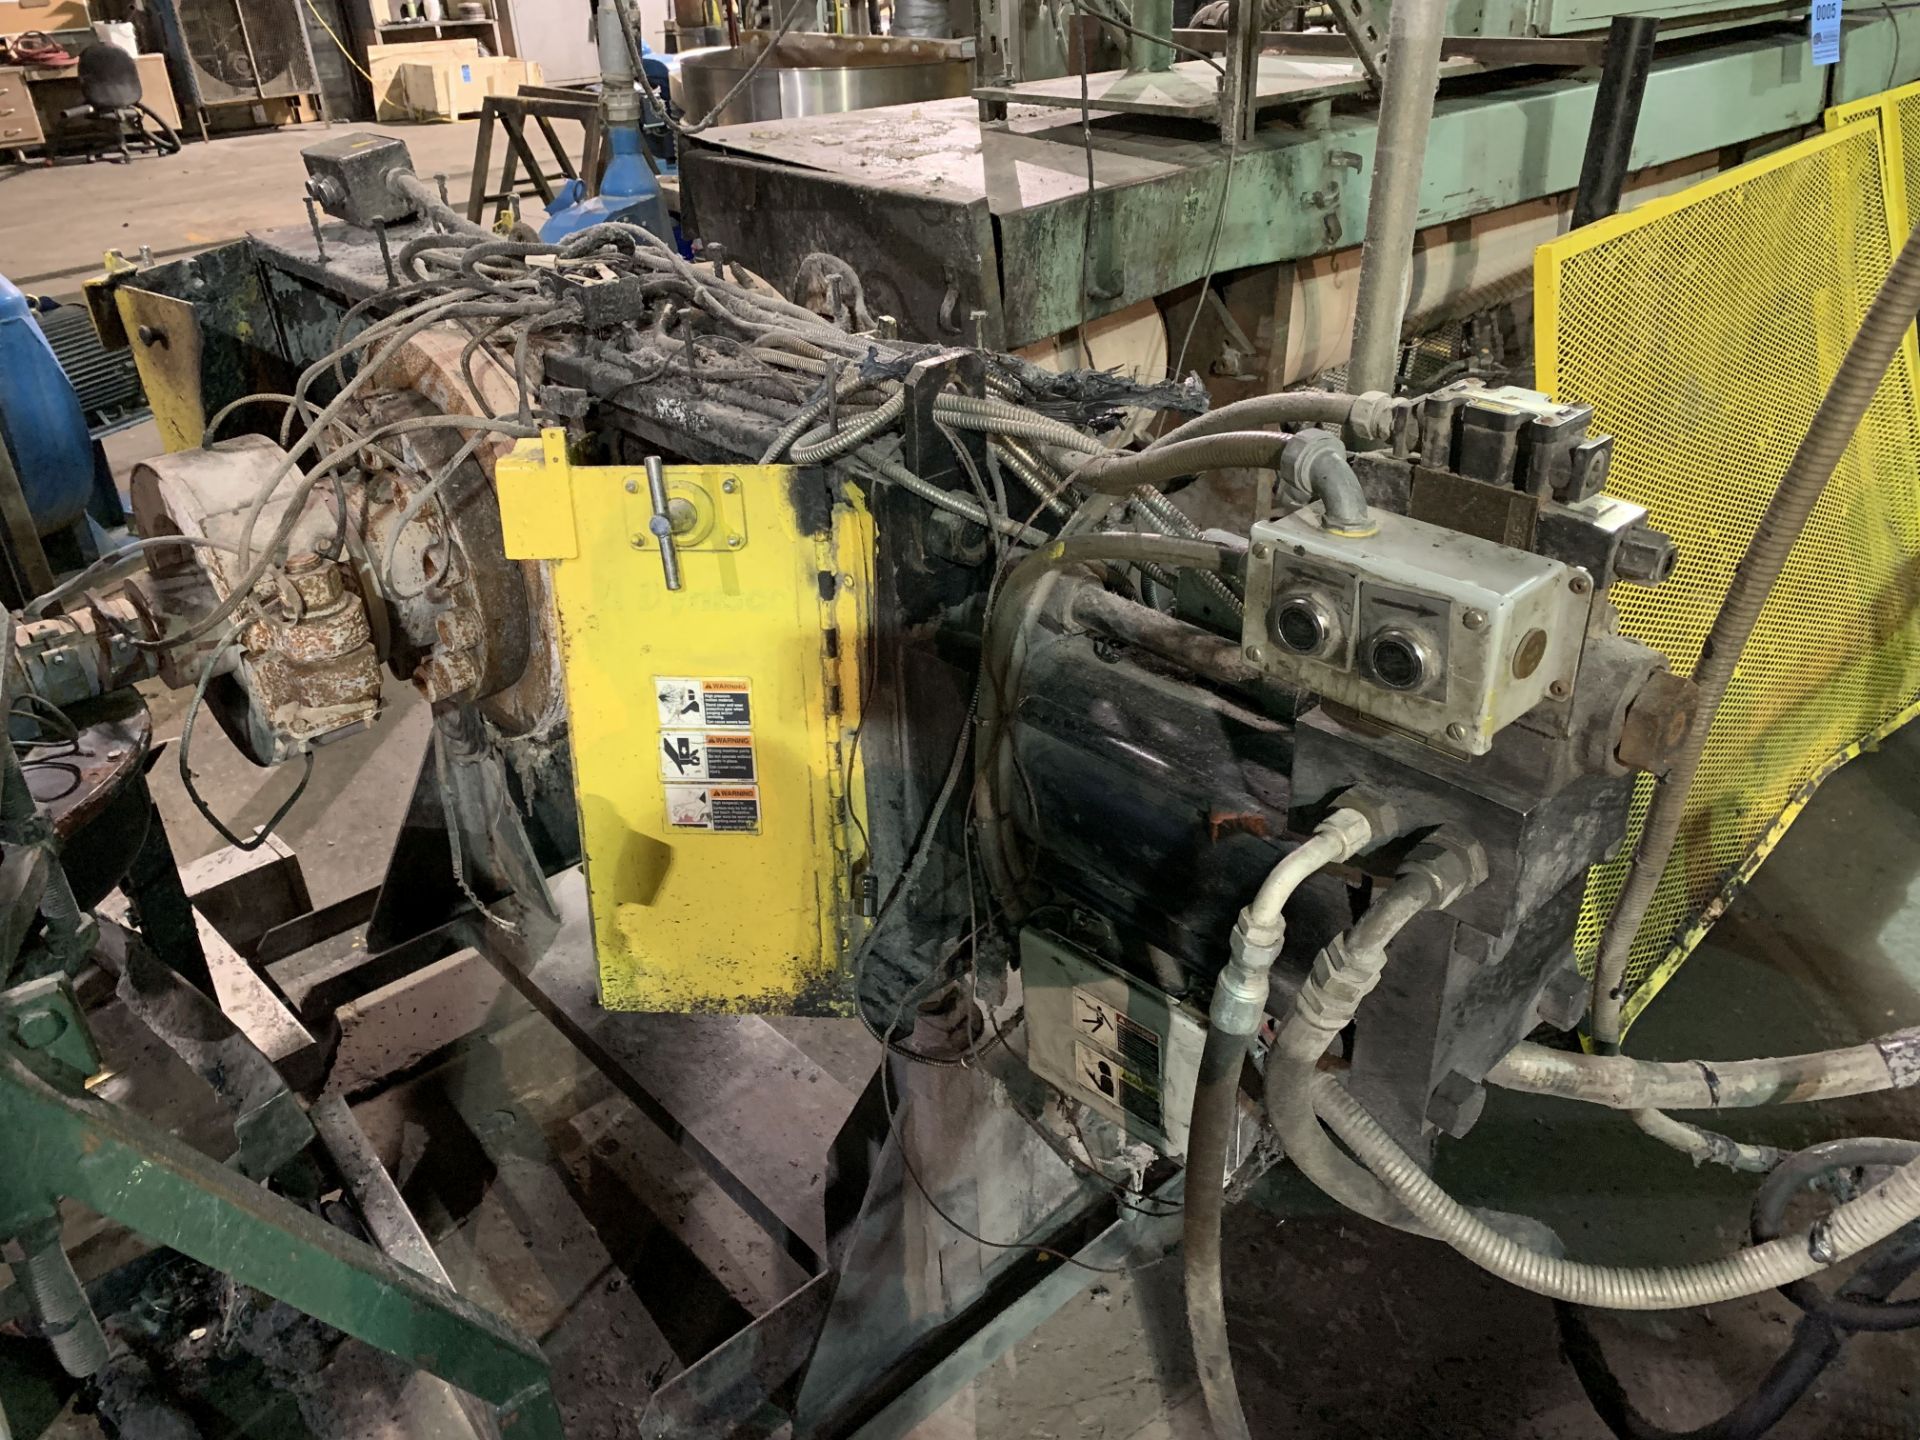 6" NRM PACEMAKER EXTRUDER 24:1 L/D, 200 HP WITH 8" HYDRAULIC SCREEN CHANGER; S/N 5455, 18:1 - Image 9 of 14